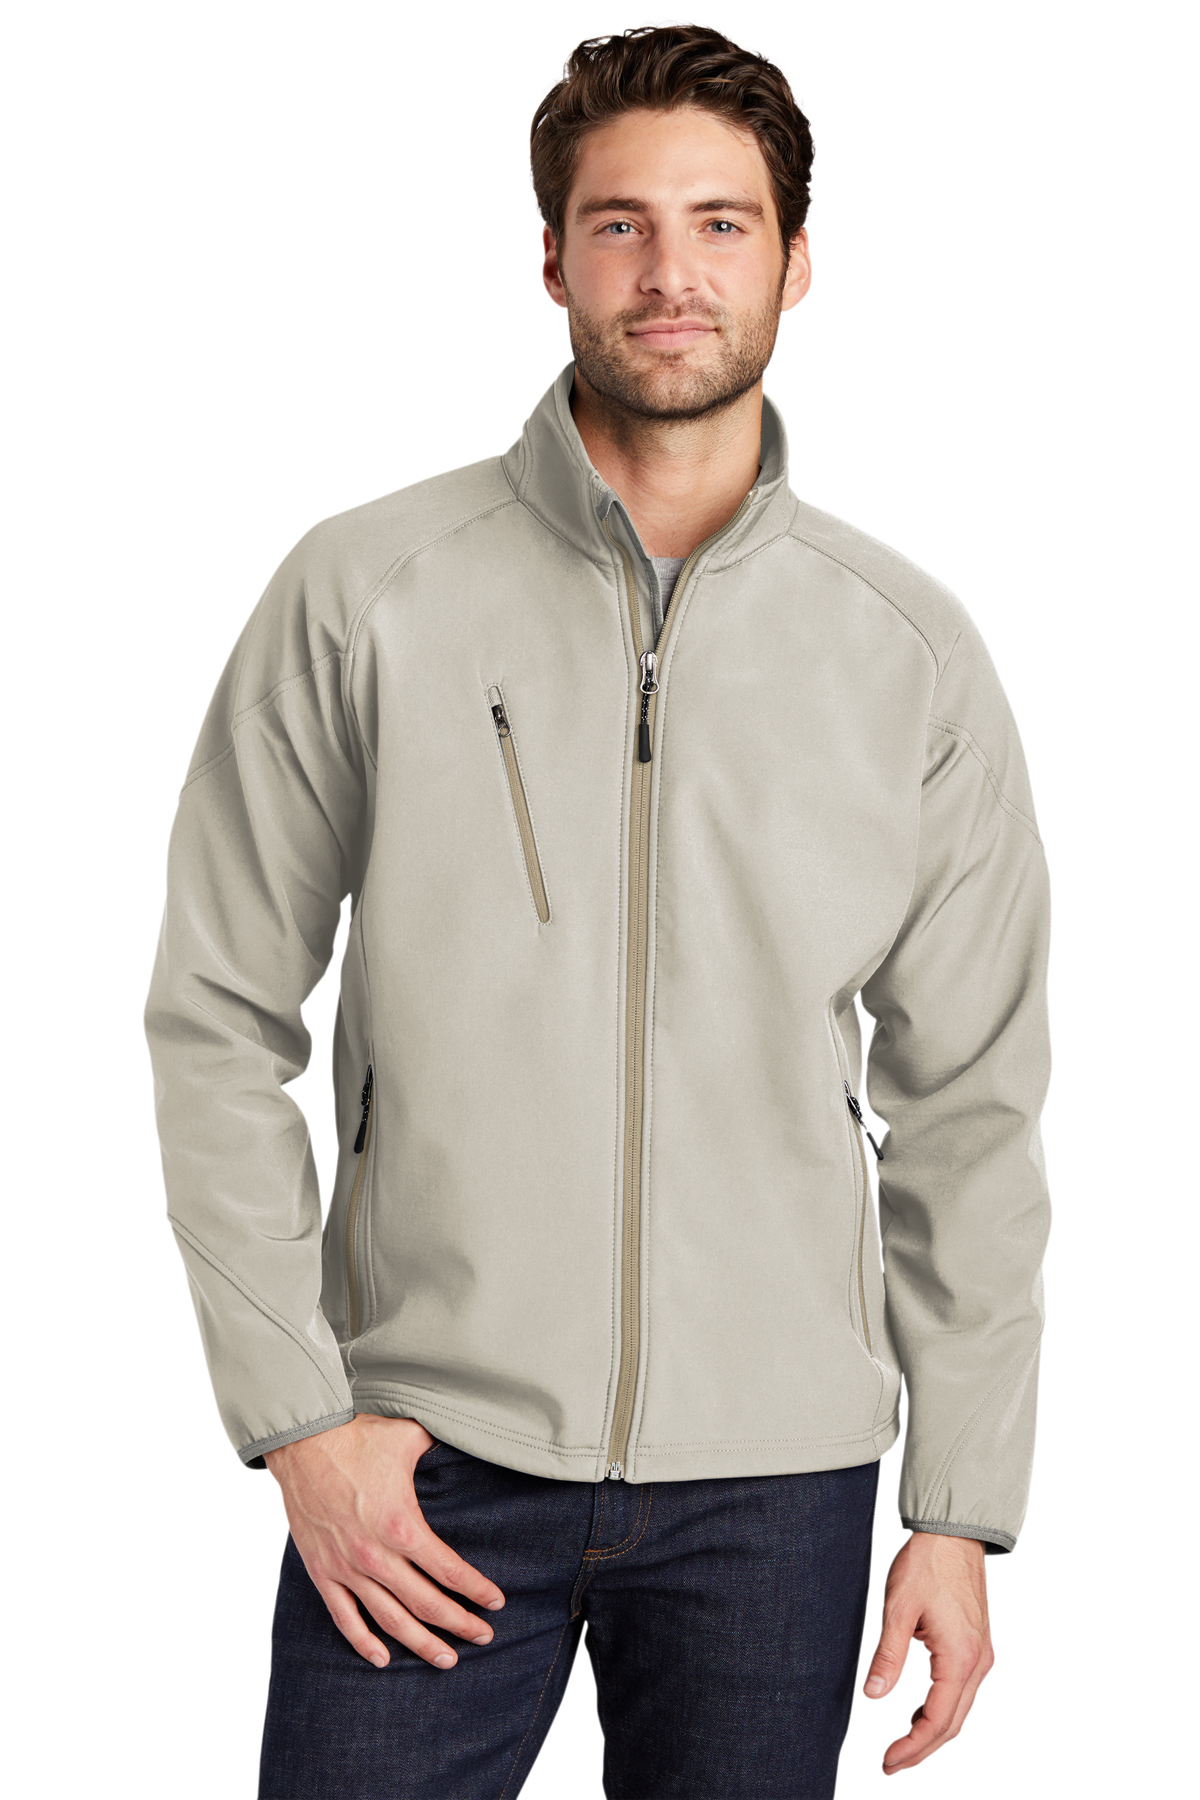 Port Authority Textured Soft Shell Jacket | Product | SanMar